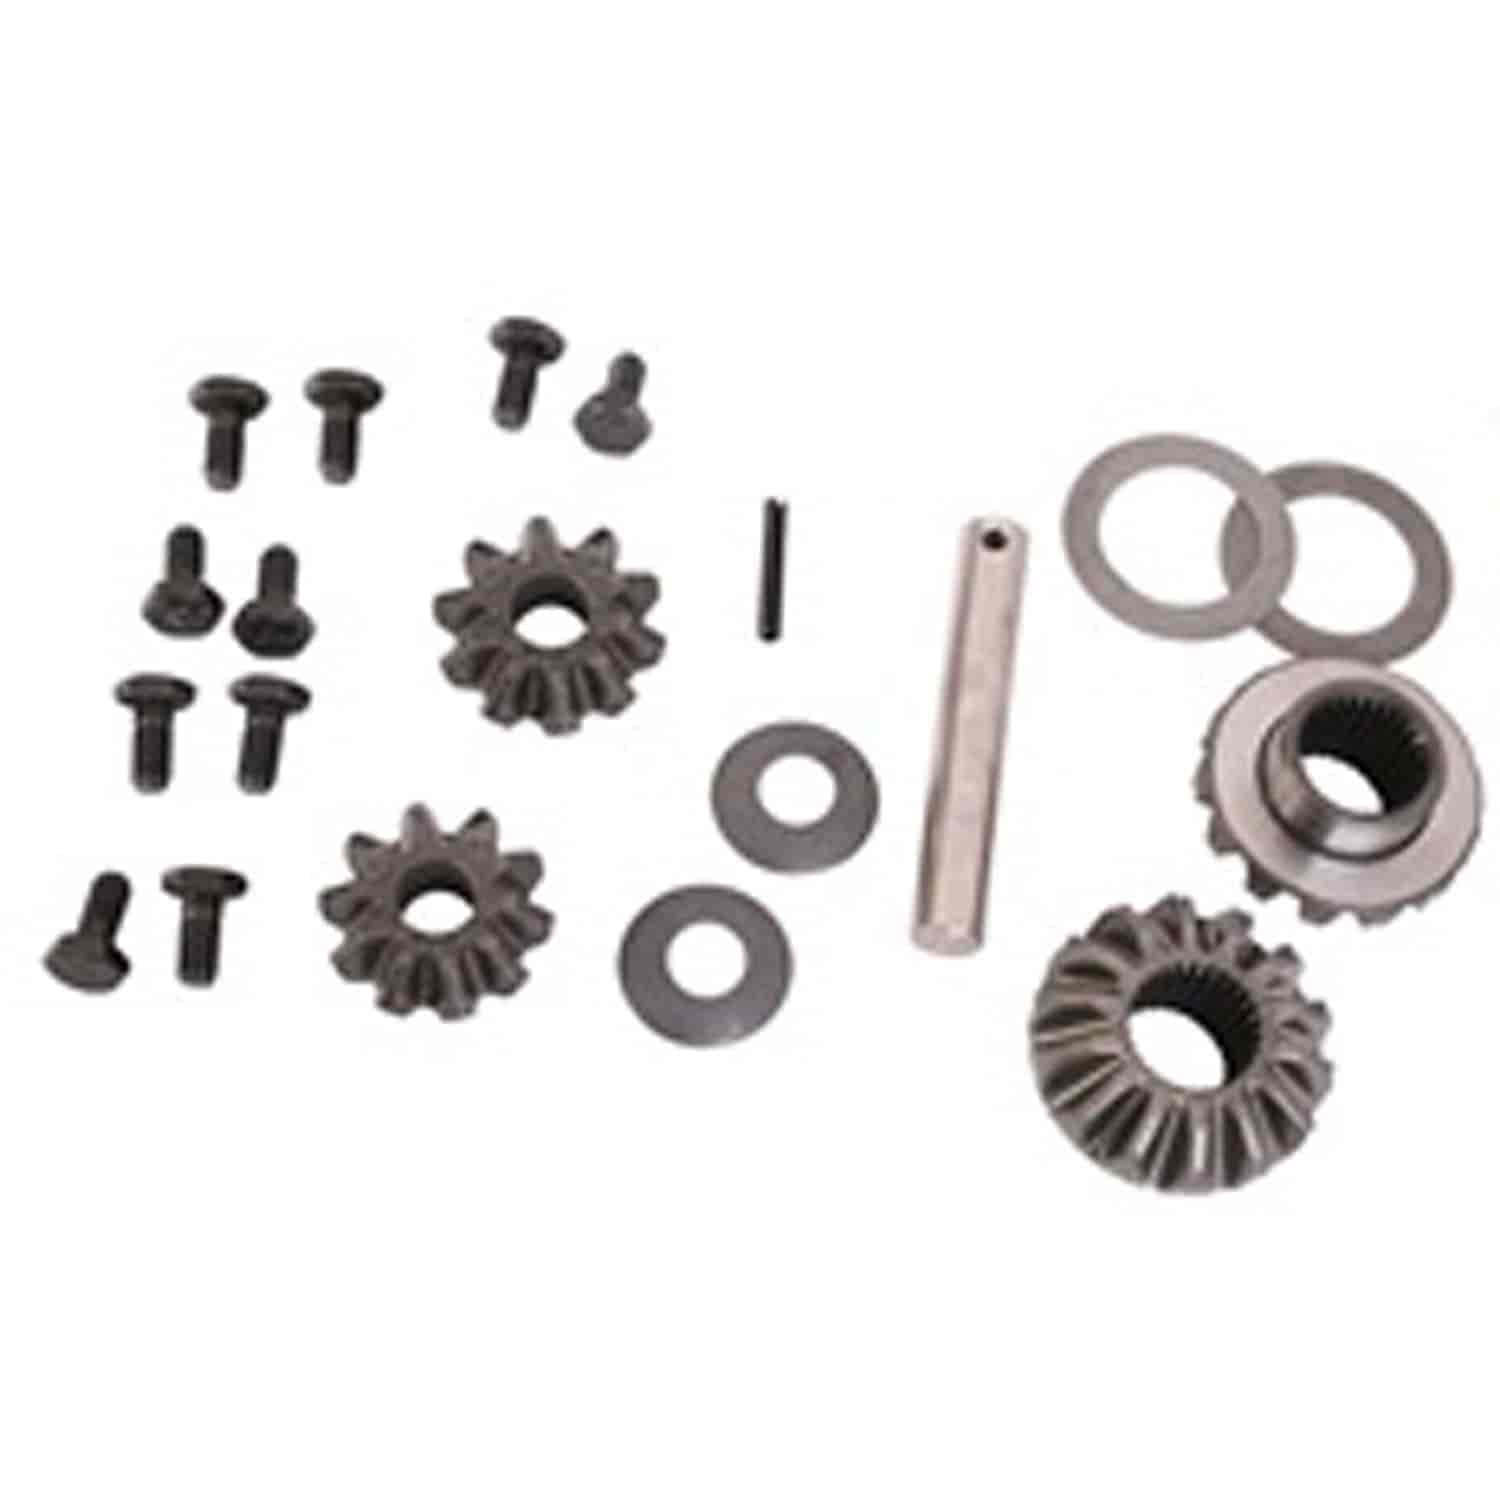 Differential Parts Kit for Dana Super 30 2002-2007 Liberty